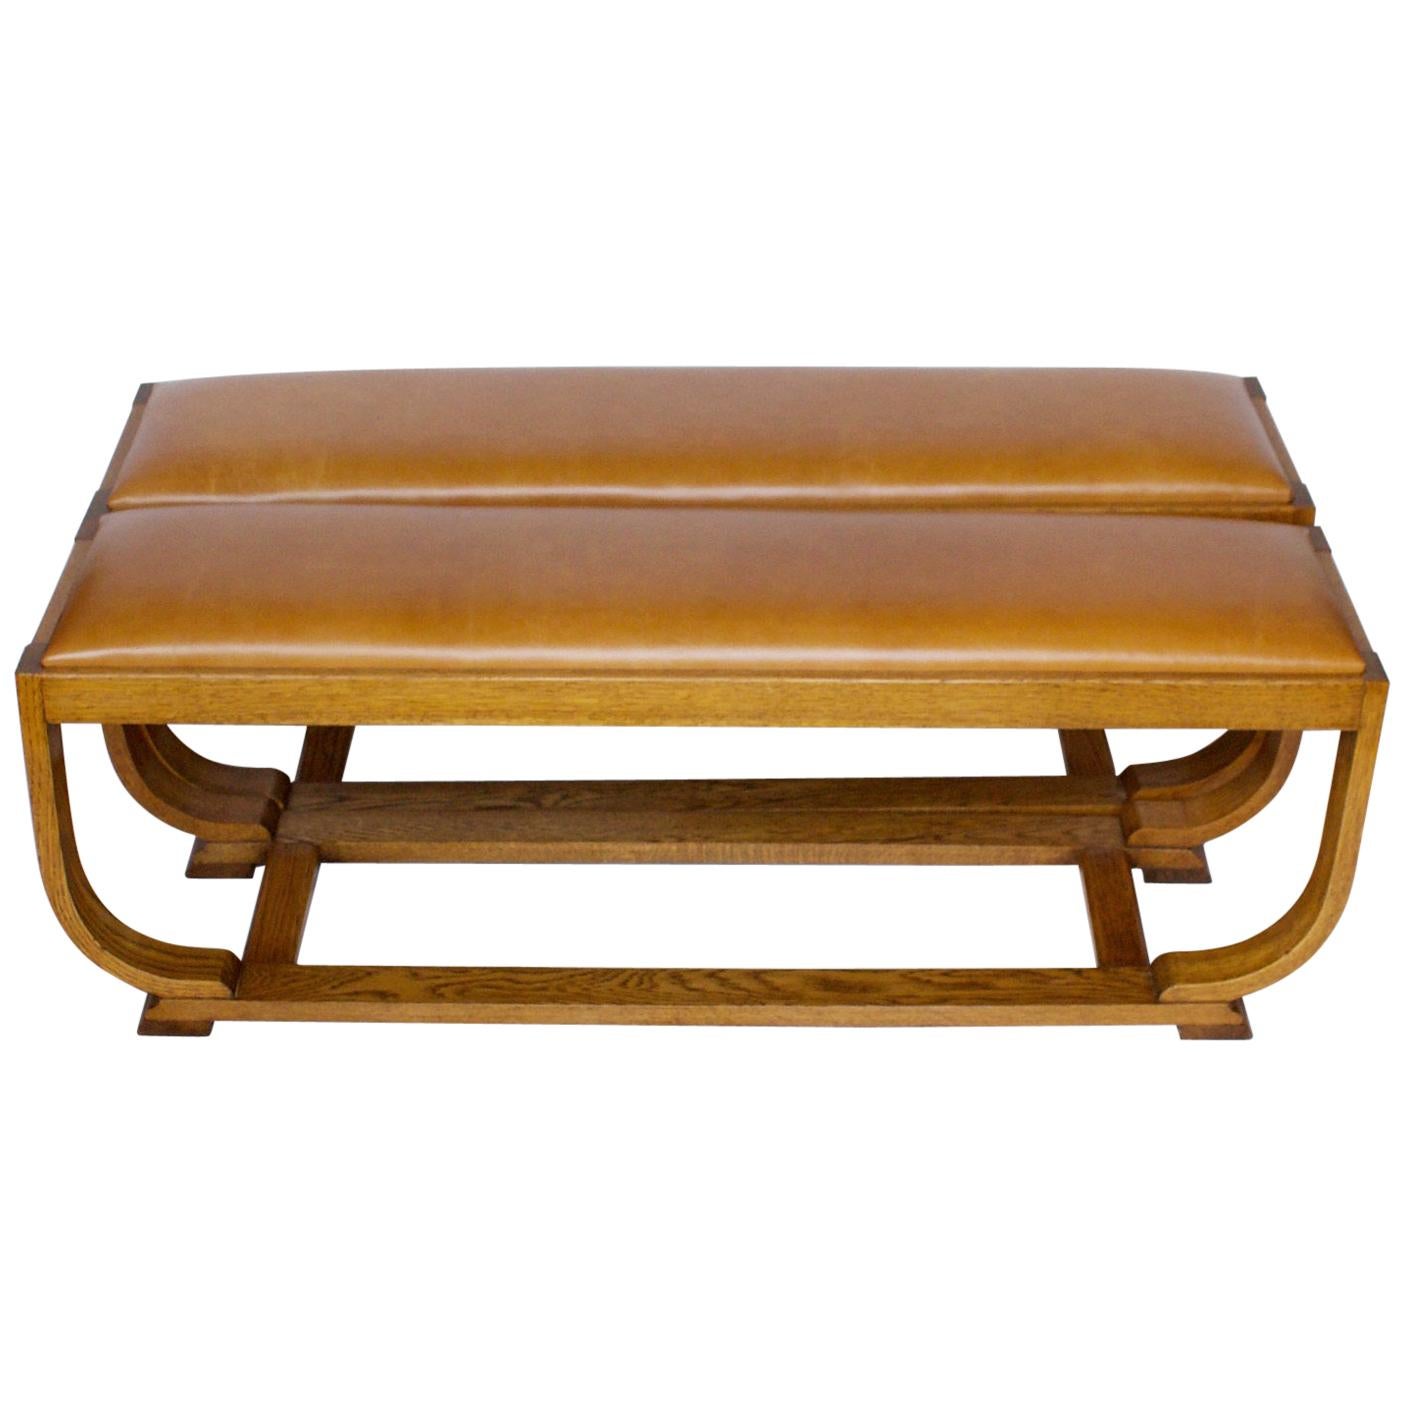 Pair of Art Deco Benches by Shepherd & Hedger, English, circa 1920